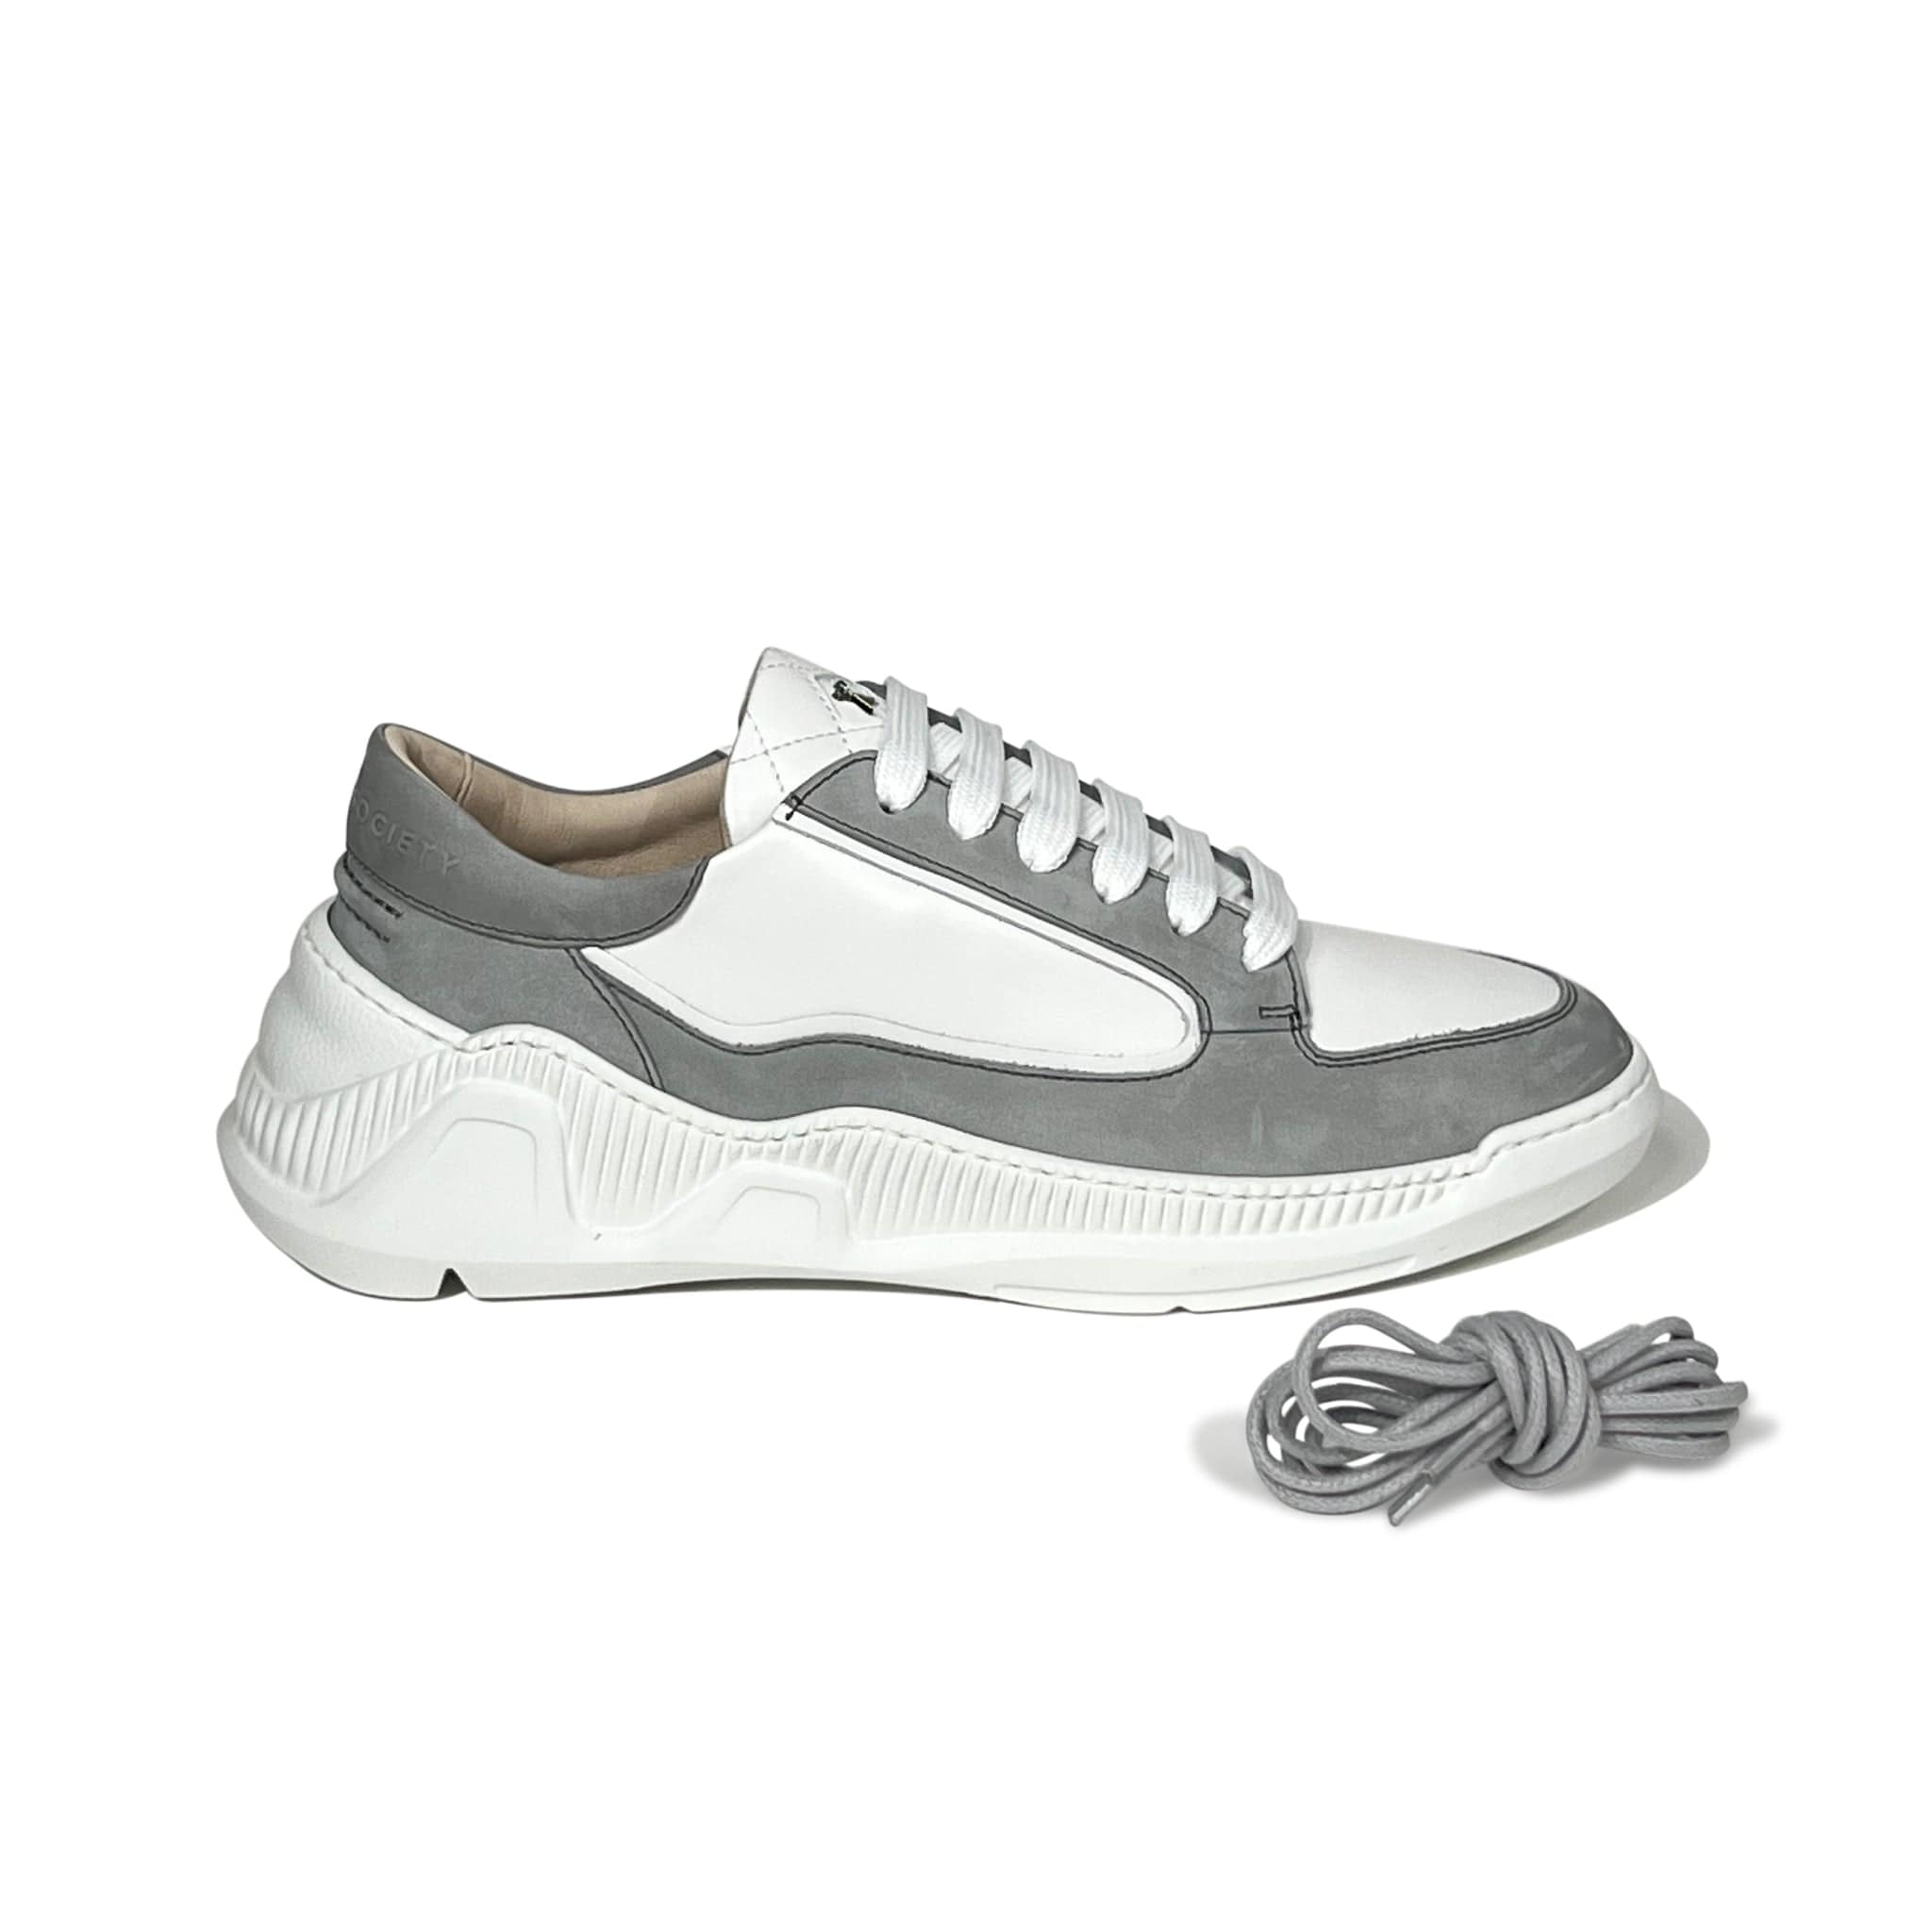 Nesto Low Top Italian Leather Sneaker | Light Grey and White | White Outsole | Made in Italy